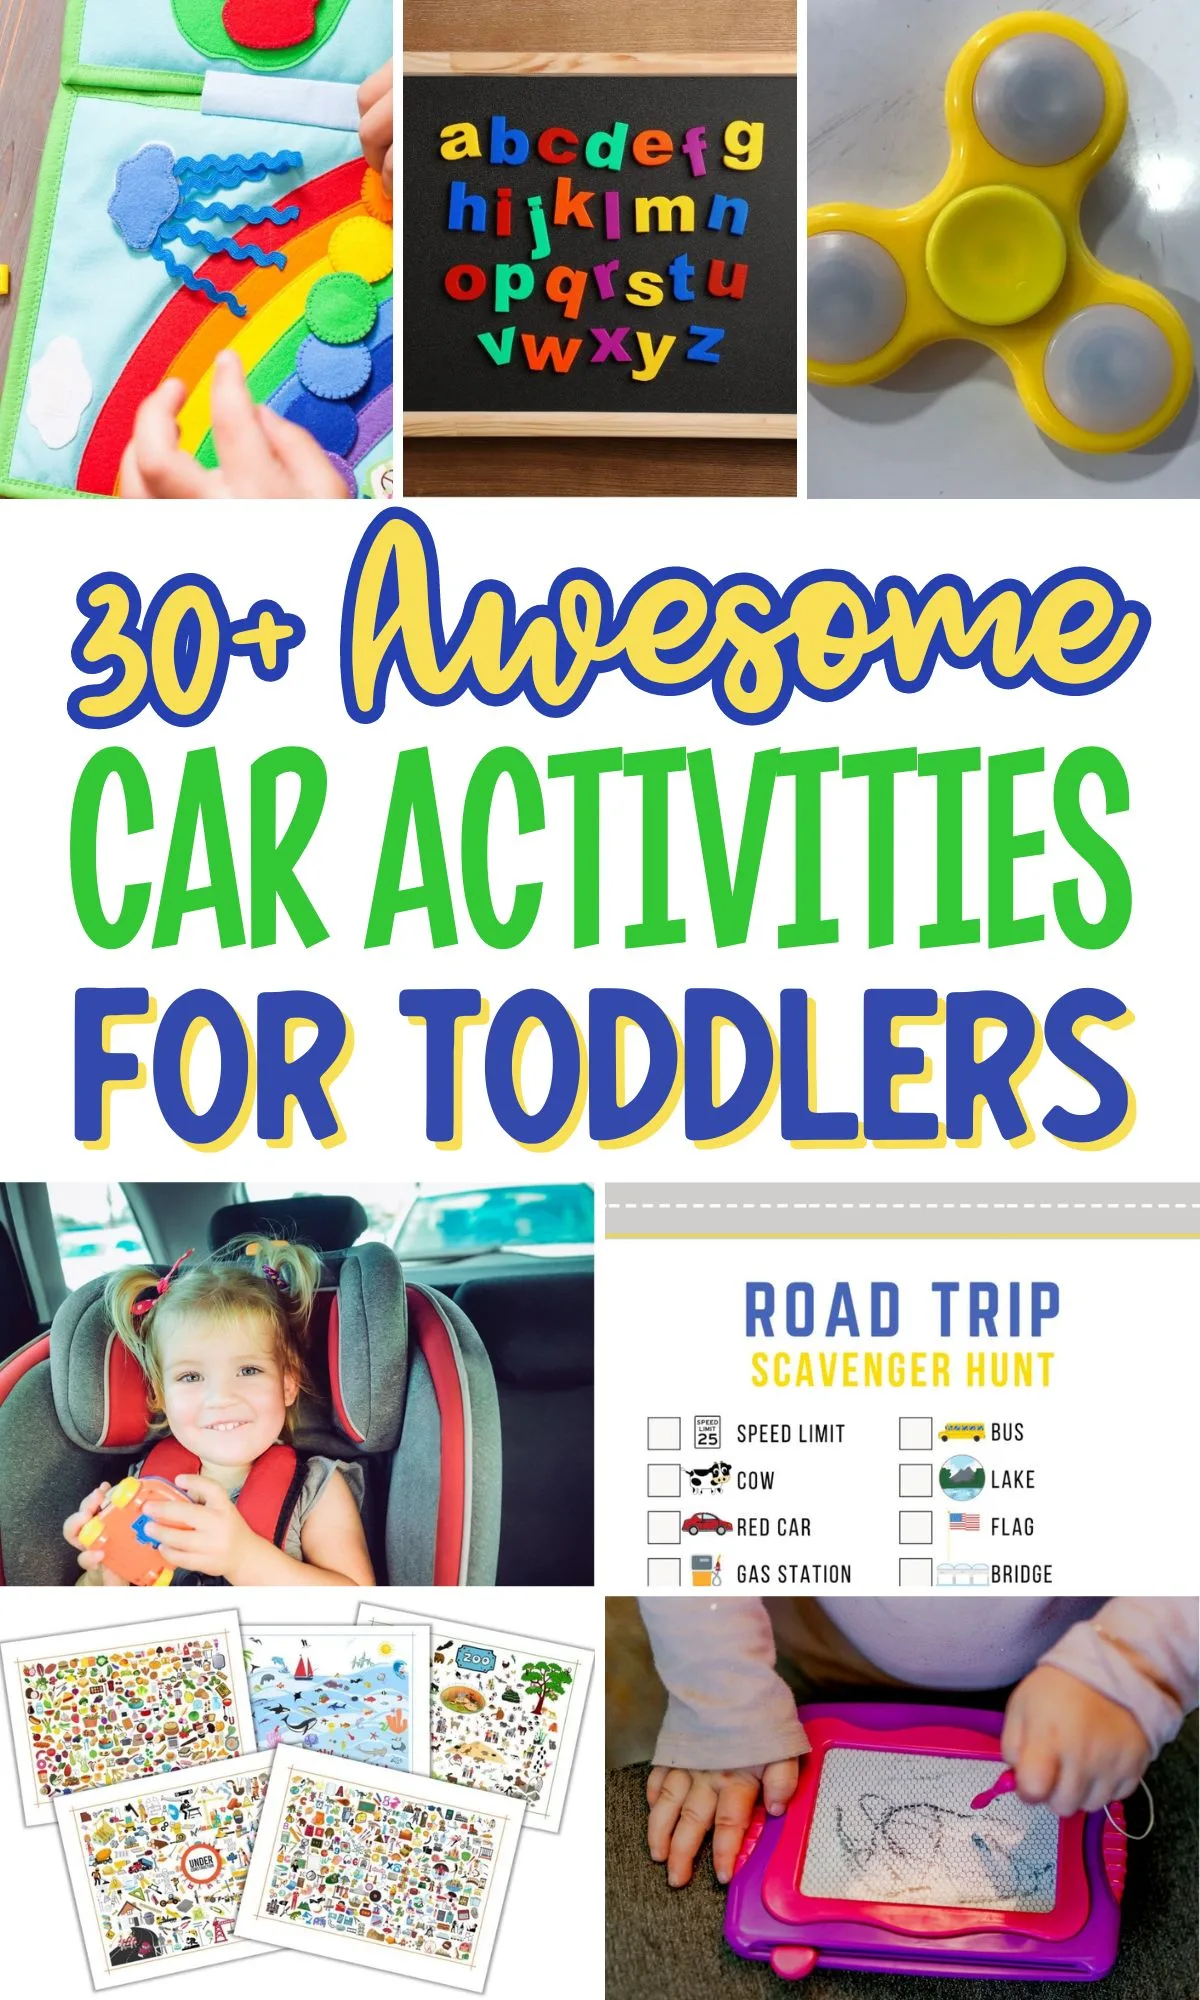 Image graphic with text that reads "30+ Awesome Car Activities for Toddlers" and a collage of activity ideas.